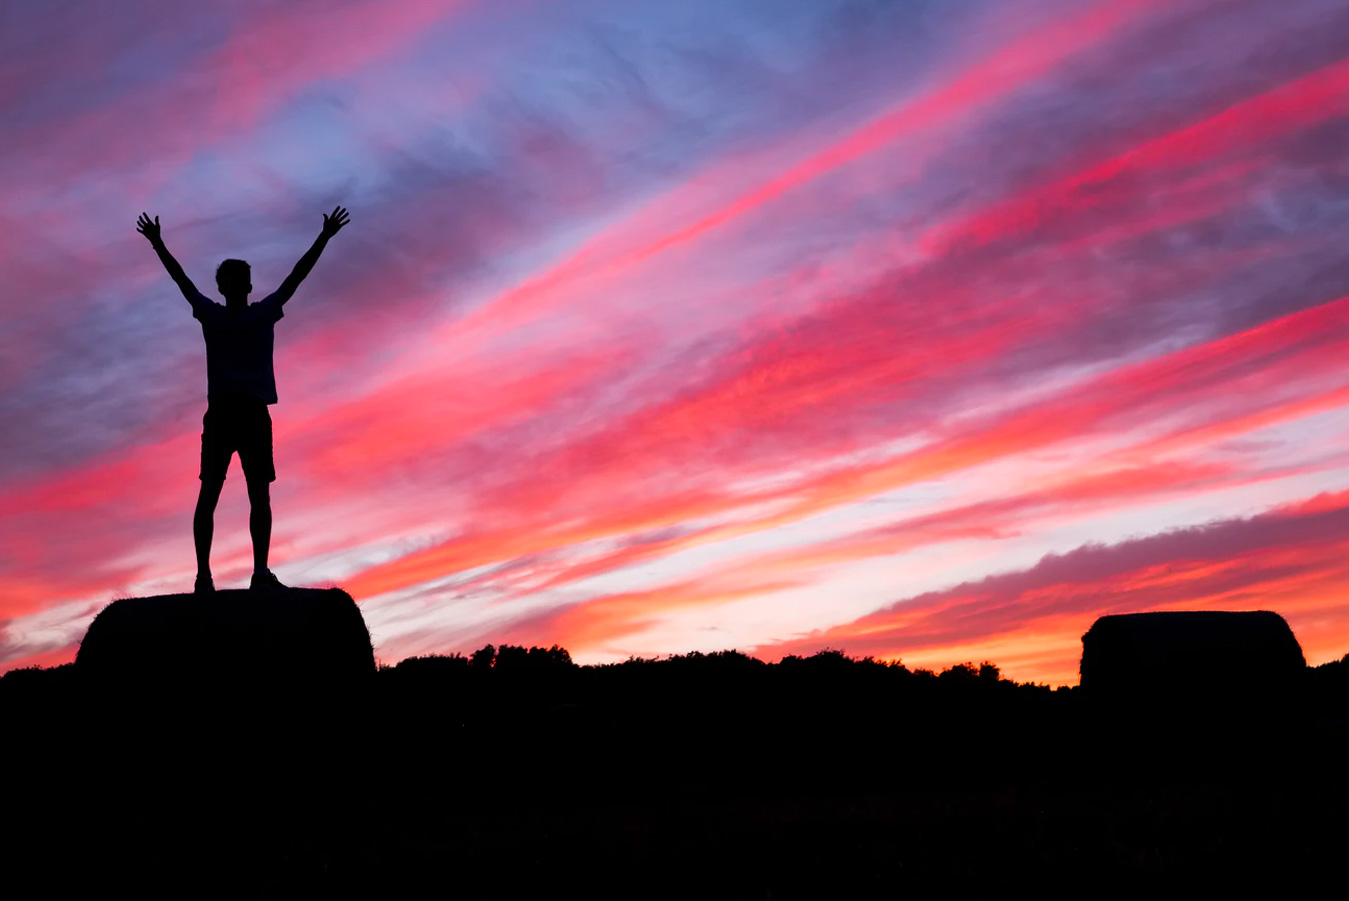 Black foregrond with a person standing, arms raised in success against a sunset backdrop